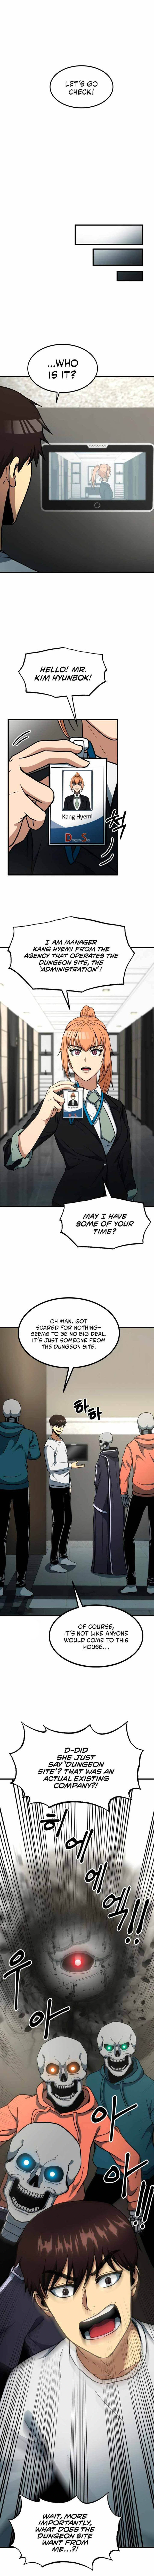 dungeon_house_38_15